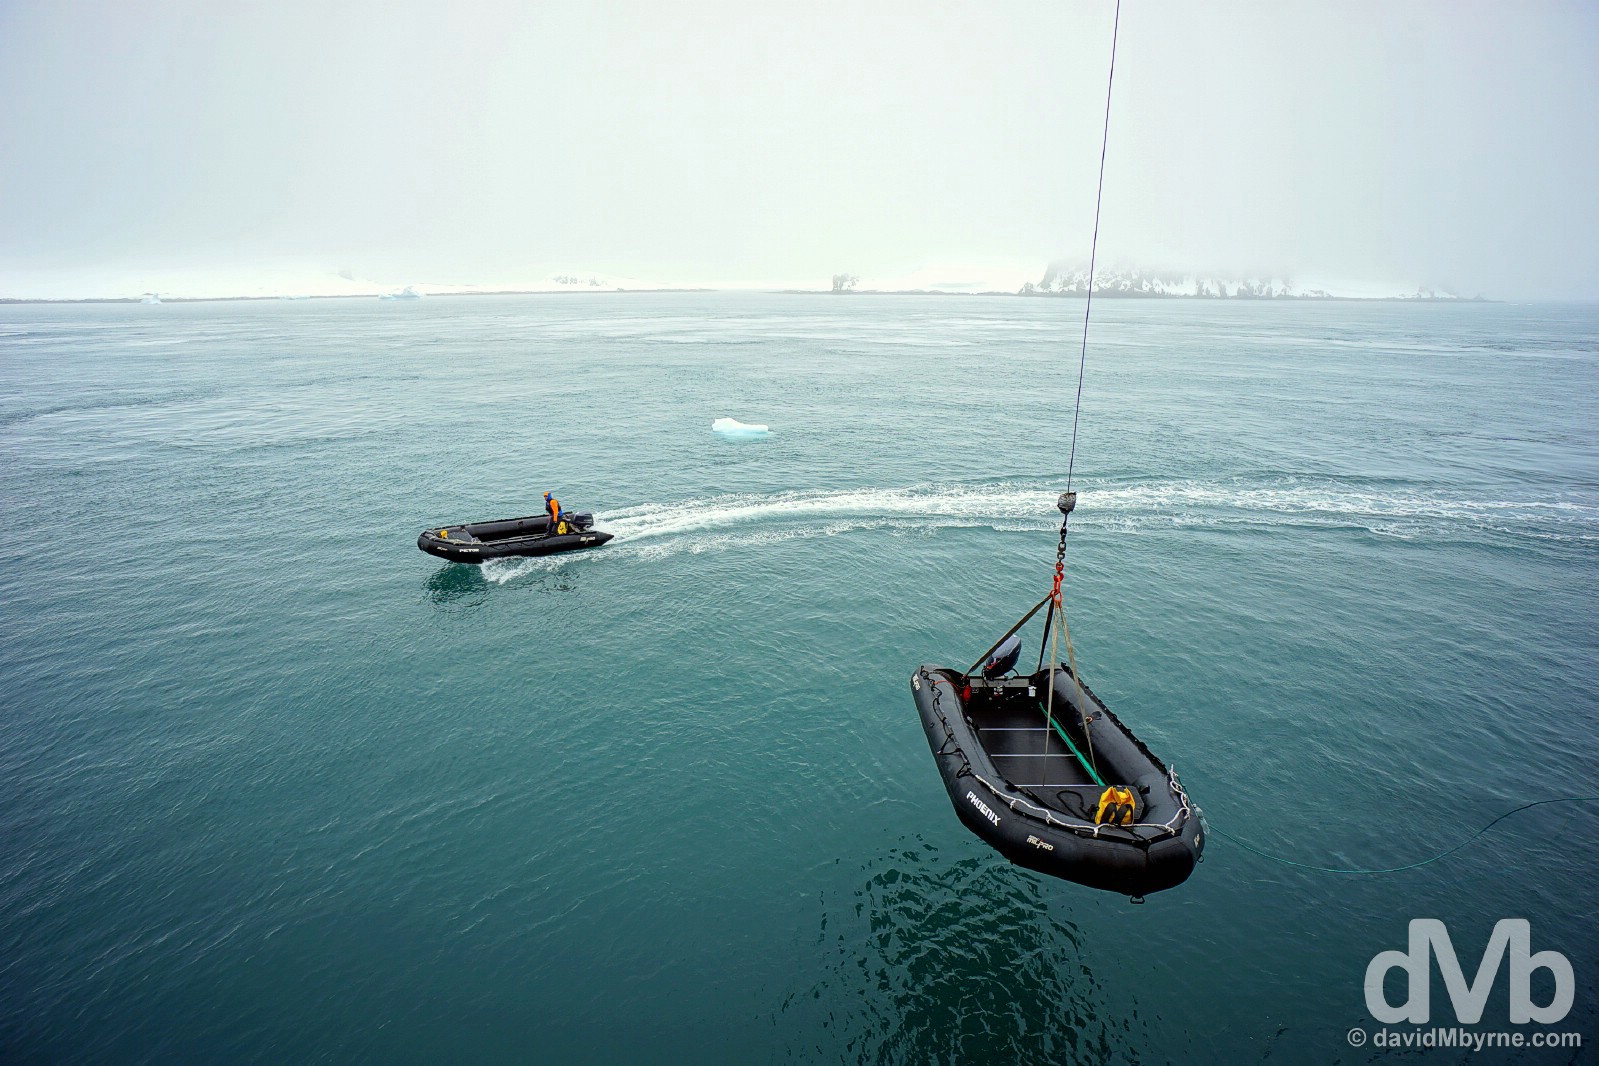 Zodiacs being lowered from the M/V Ocean Endeavour into the water after arrival at the sub-Antarctic Aticho Island group of the South Shetland Islands. November 28, 2015.